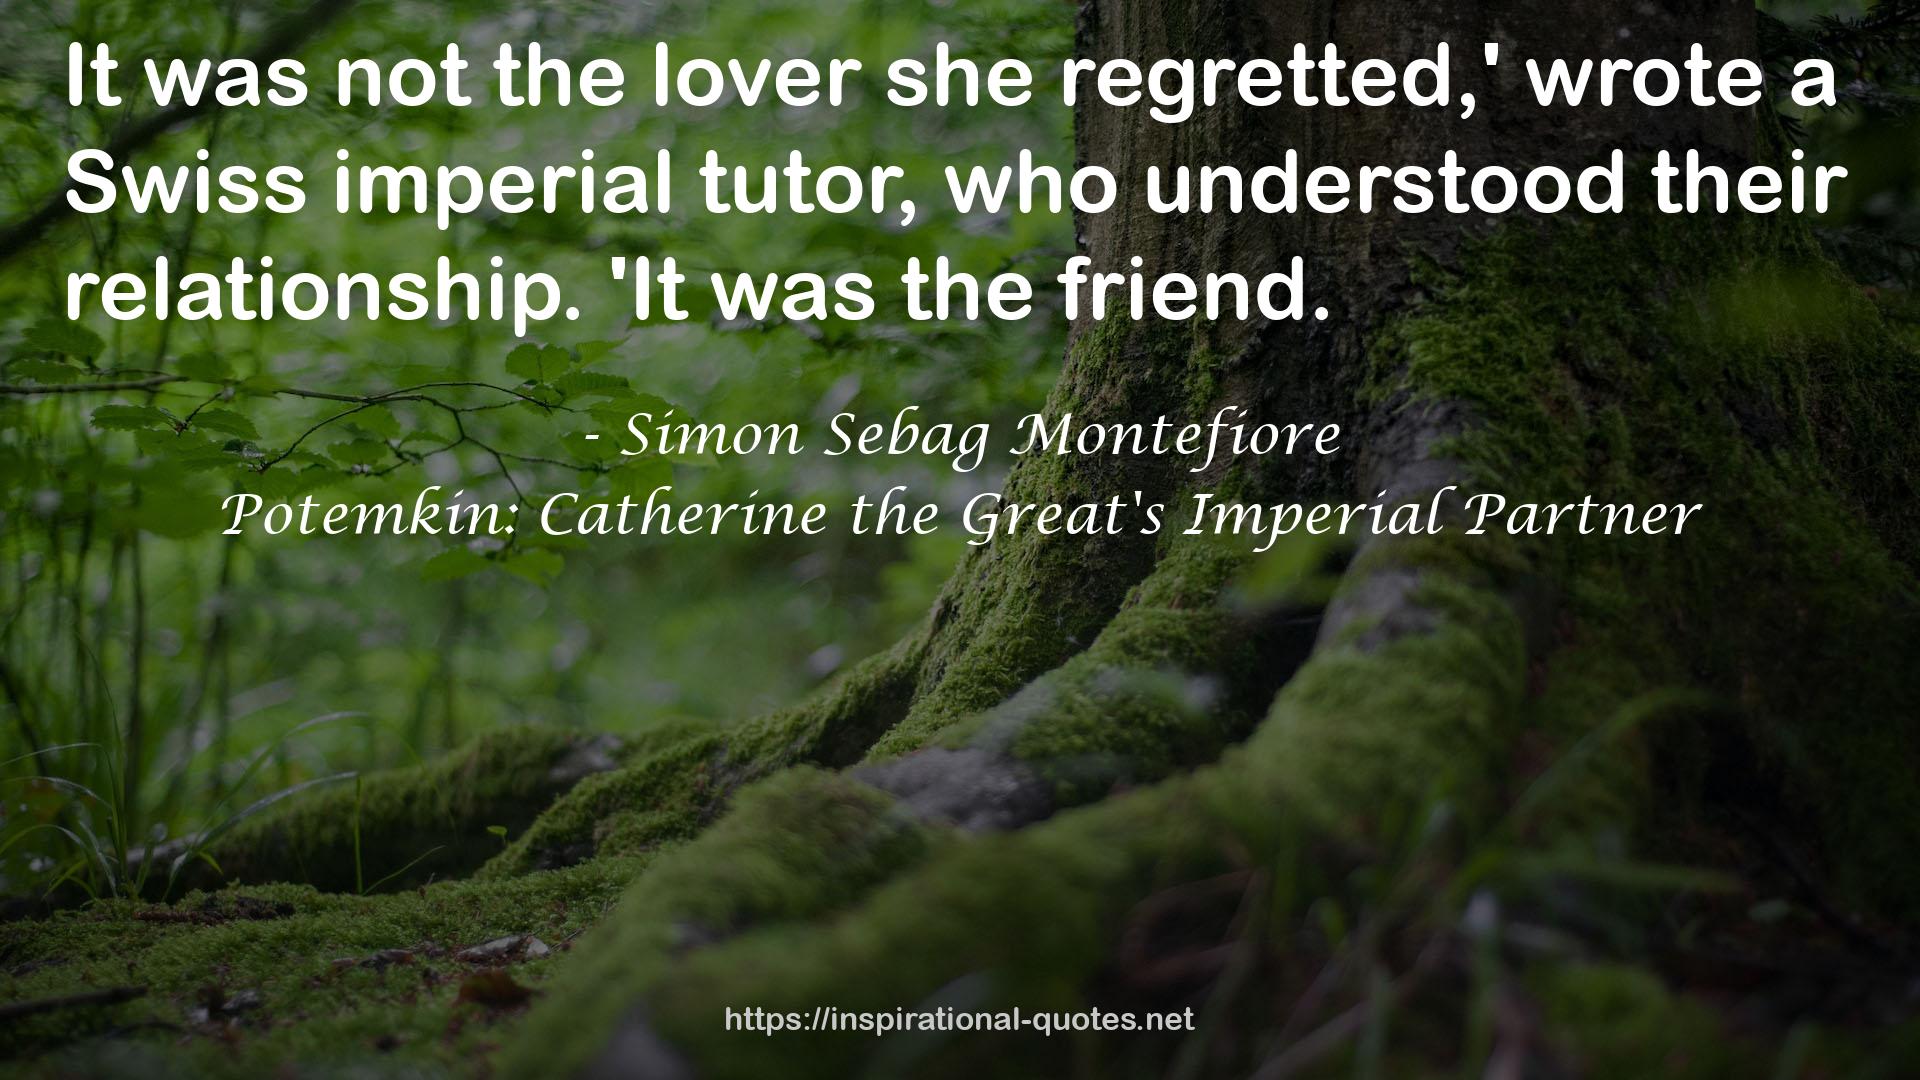 Potemkin: Catherine the Great's Imperial Partner QUOTES